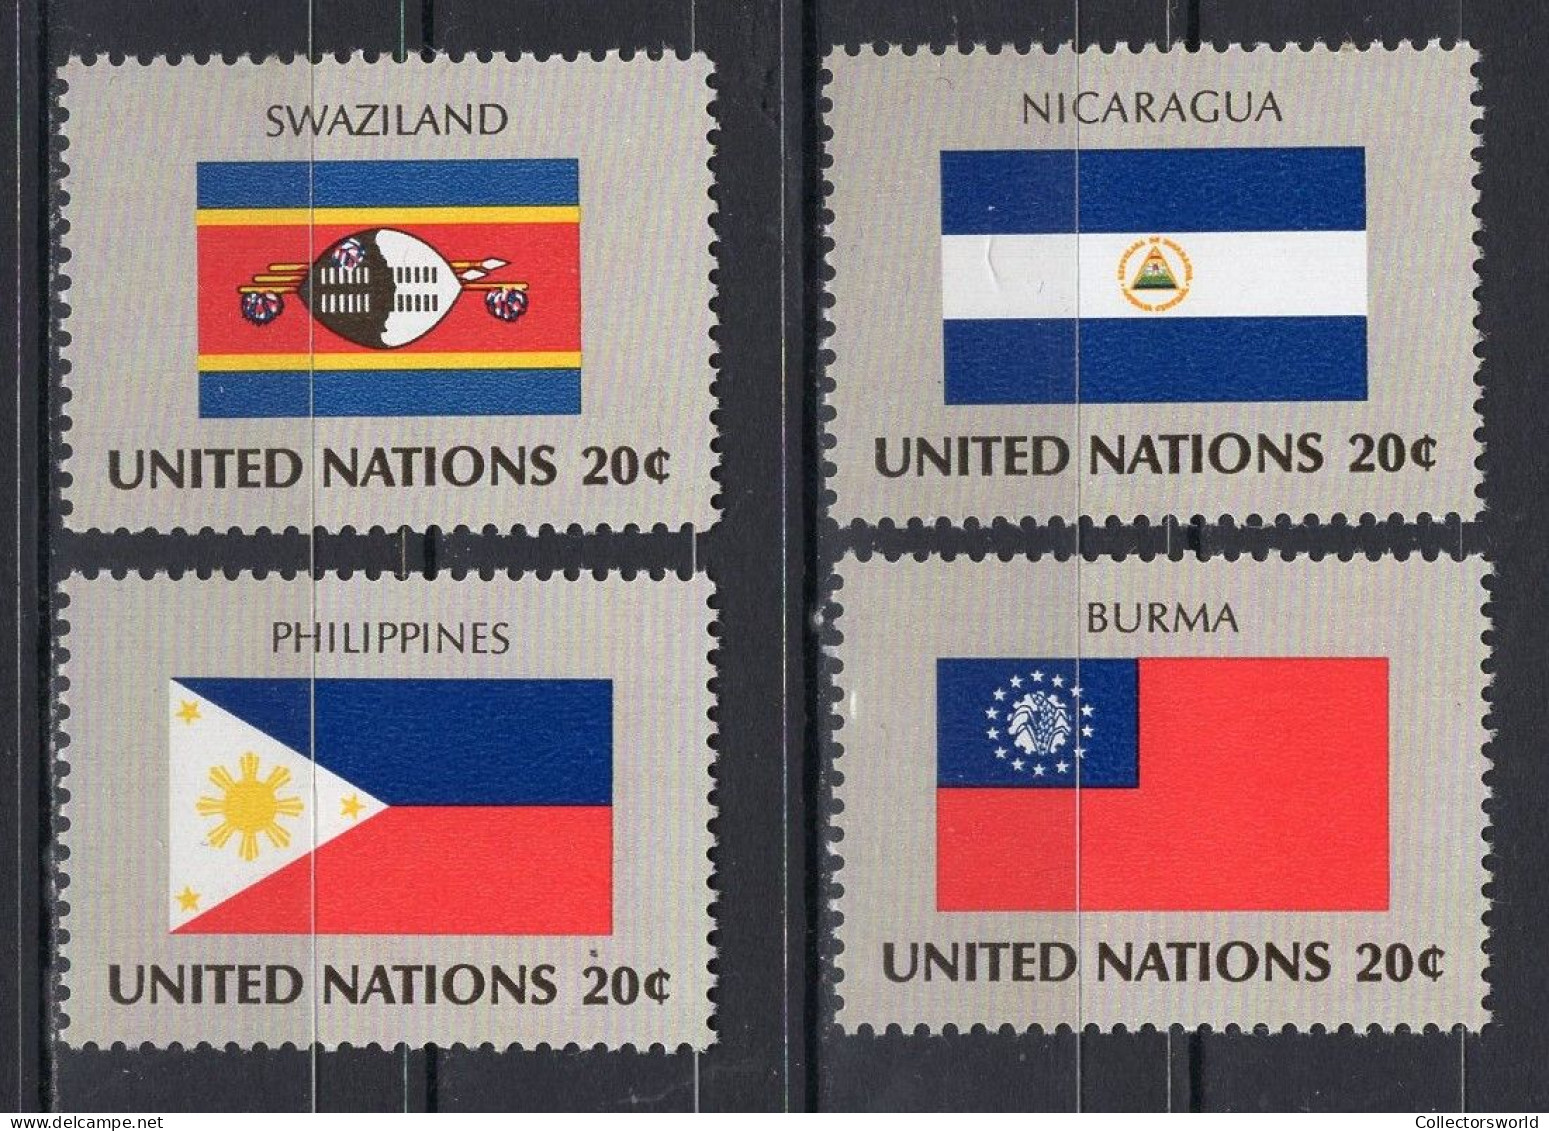 United Nations UN New York Serie 4v 1982 Flag Serie Philippines Swaziland Nicaragua MNH - Ungebraucht